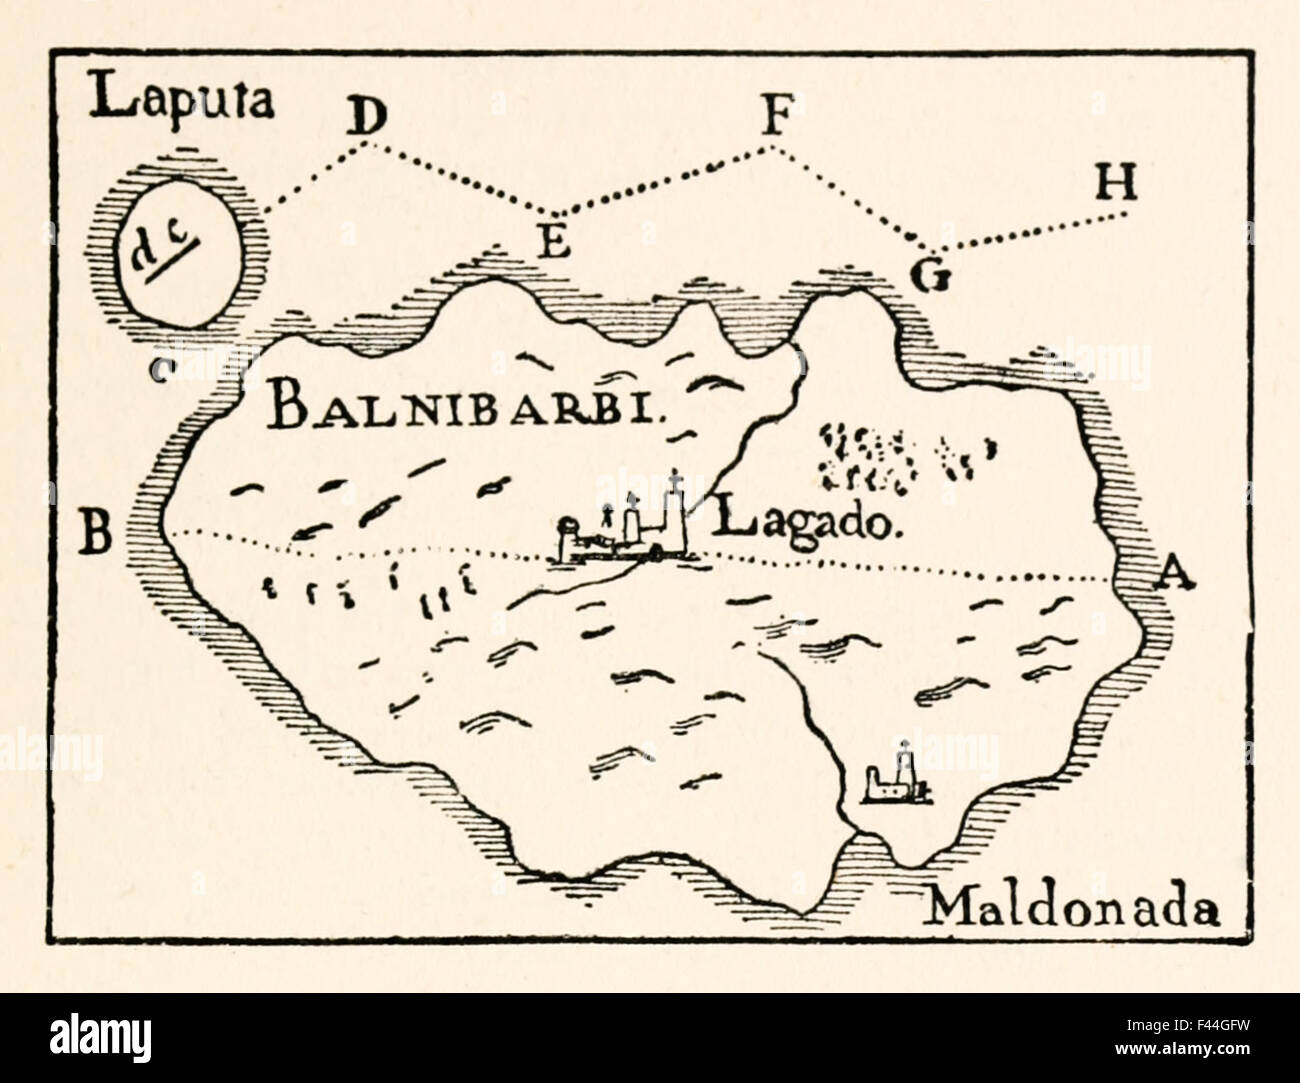 Map of Laputa (flying island top right) and Balnibarbii (main port Maldonada) from 'Part III: A Voyage to Laputa, Balnibarbi, Luggnagg, Glubbdubdrib, and Japan' in 'Gulliver's Travels' by Jonathan Swift (1667-1745), illustration by Arthur Rackham (1867-1939). See description for more information. Stock Photo